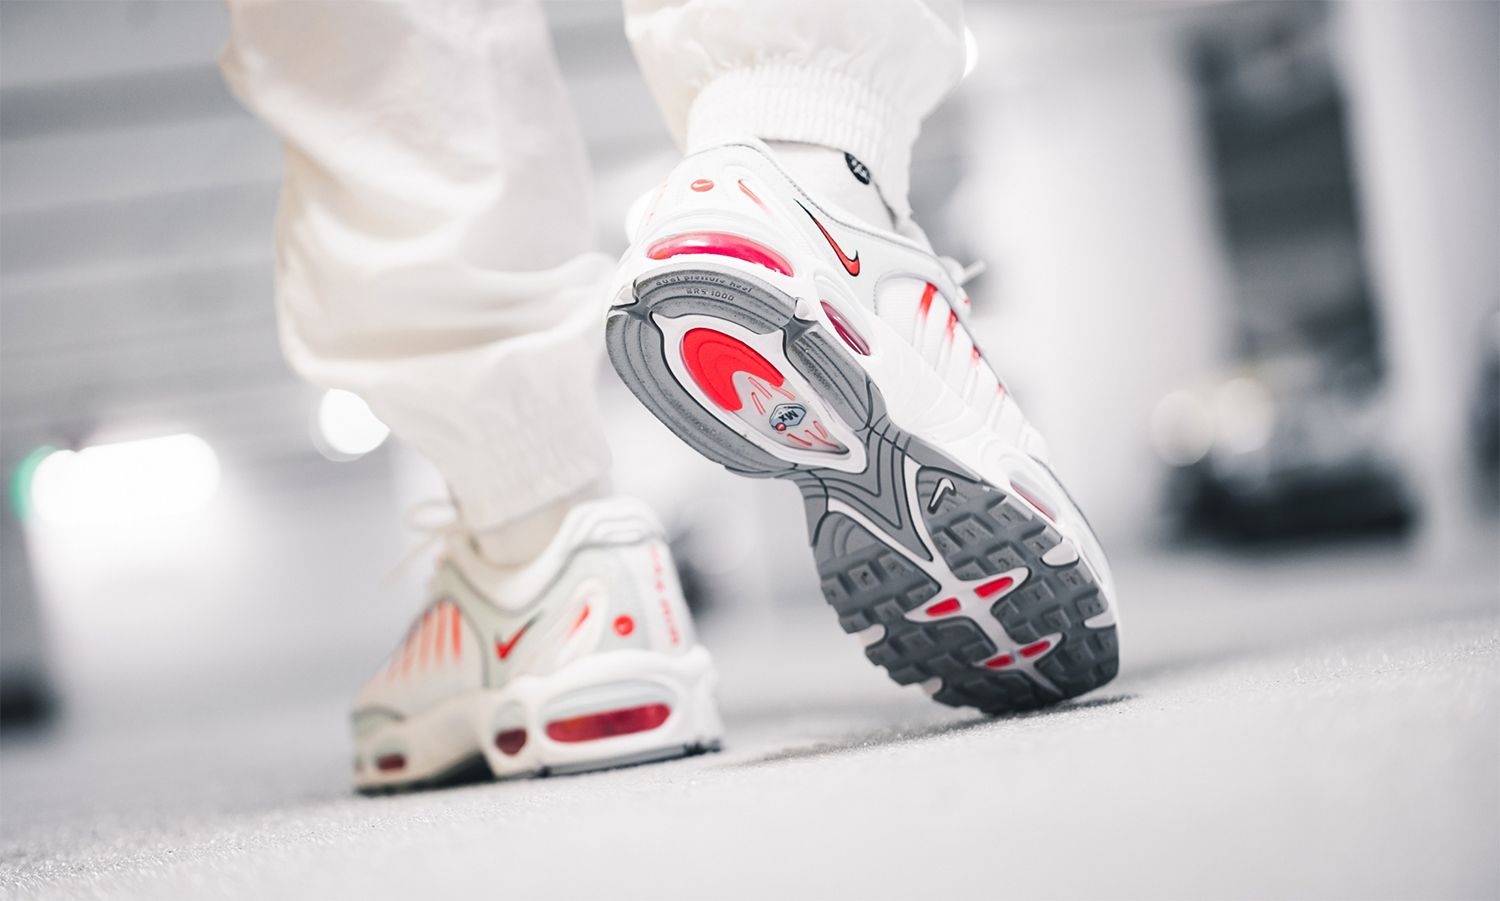 semilla Maravilla Relación Available Now // Nike Air Max Tailwind IV "Red Orbit" | HOUSE OF HEAT